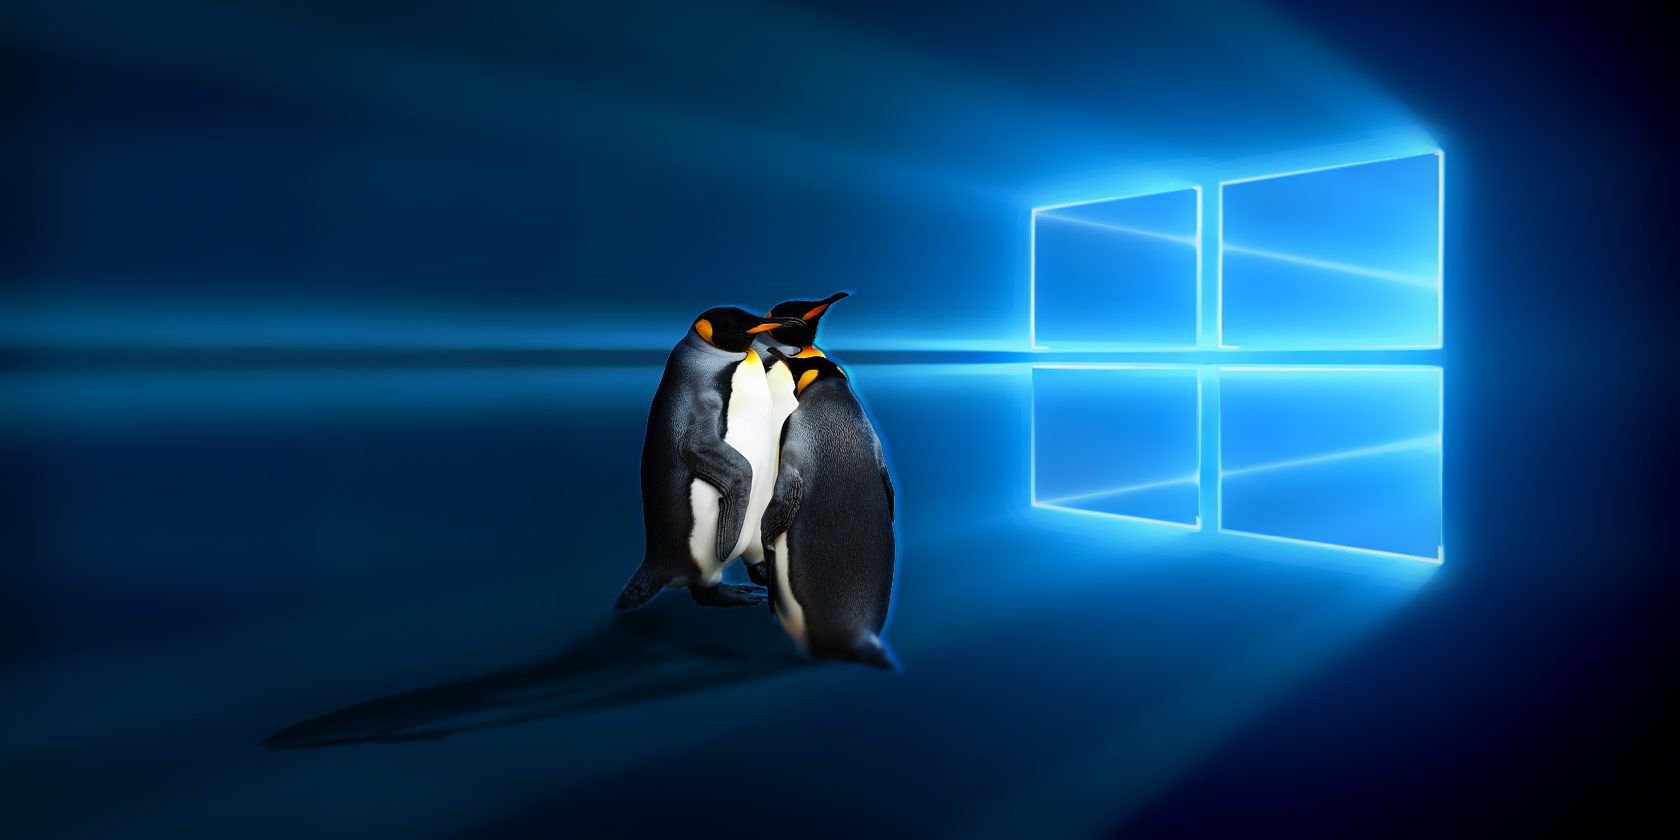 Top 7 Linux Operating Systems You Should Try in a Virtual Machine